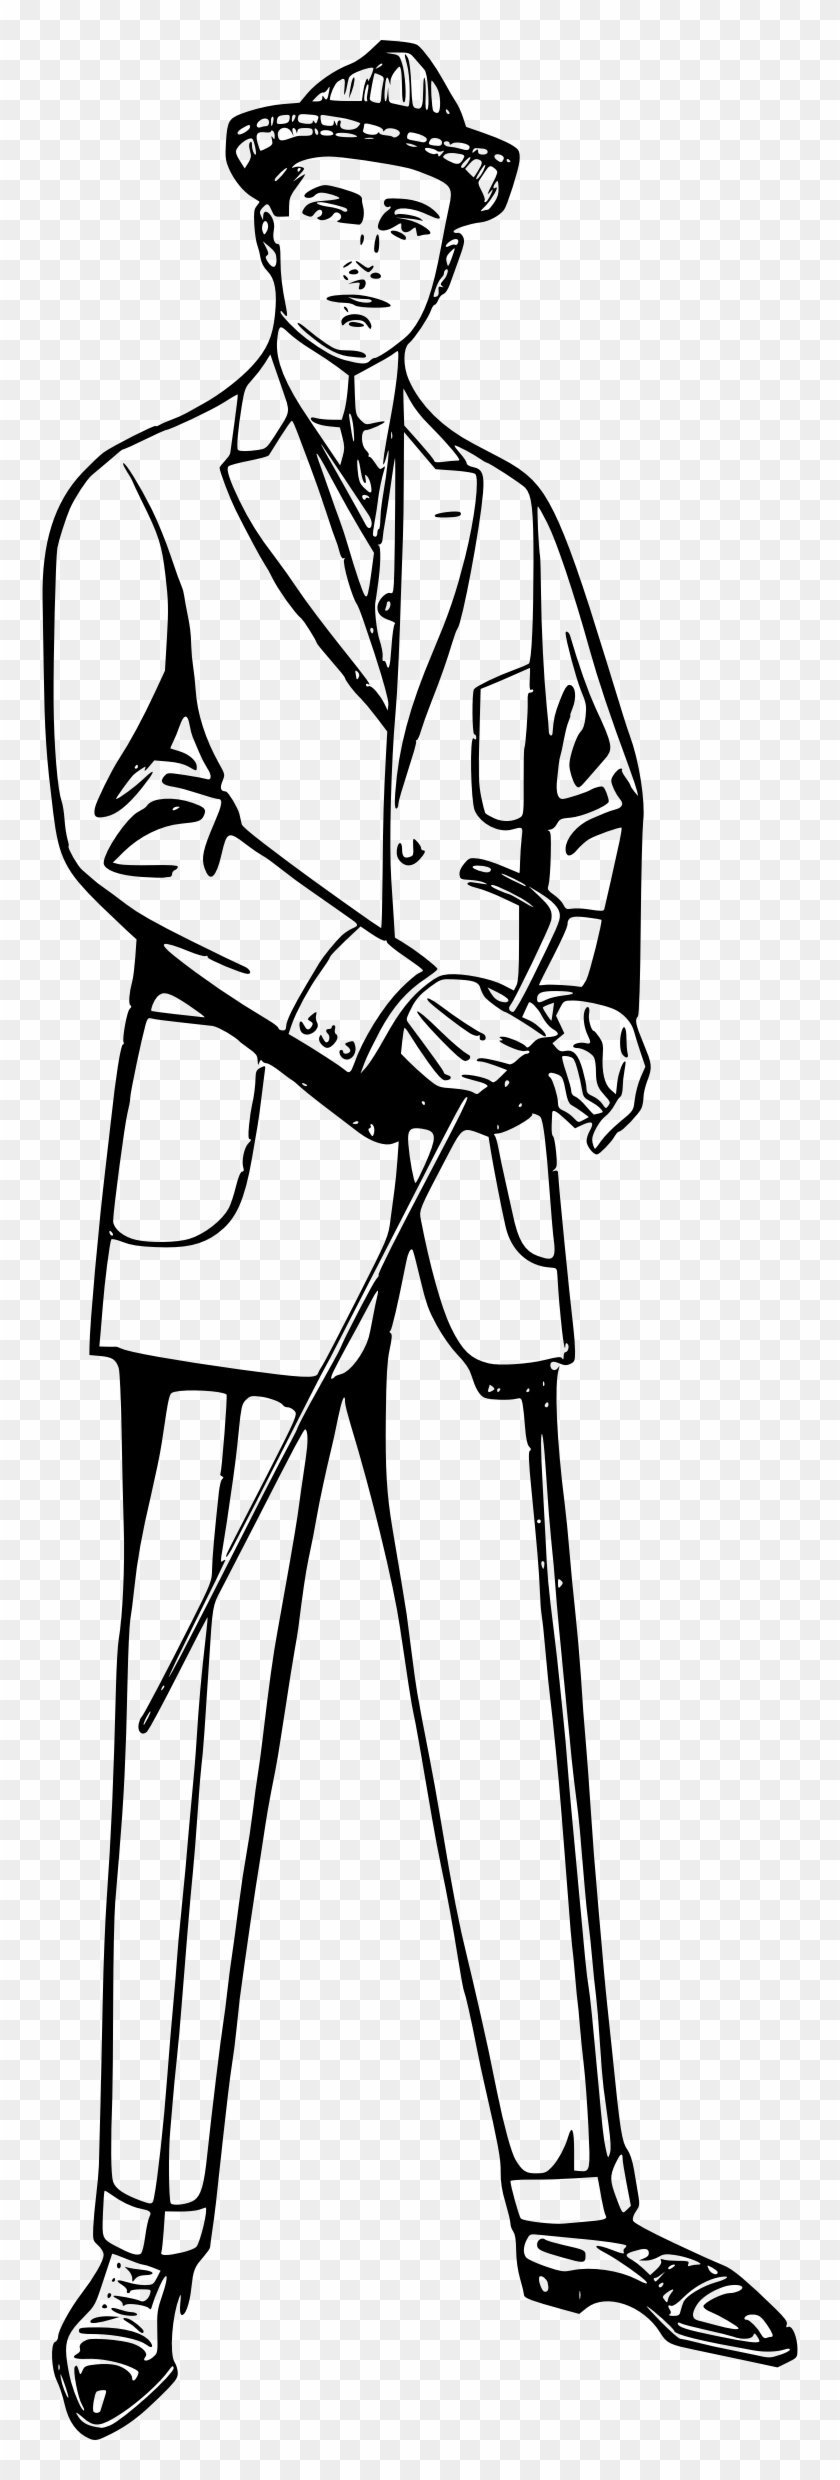 Clipart Man In Suit - Black And White Mens Suits Clipart #262113